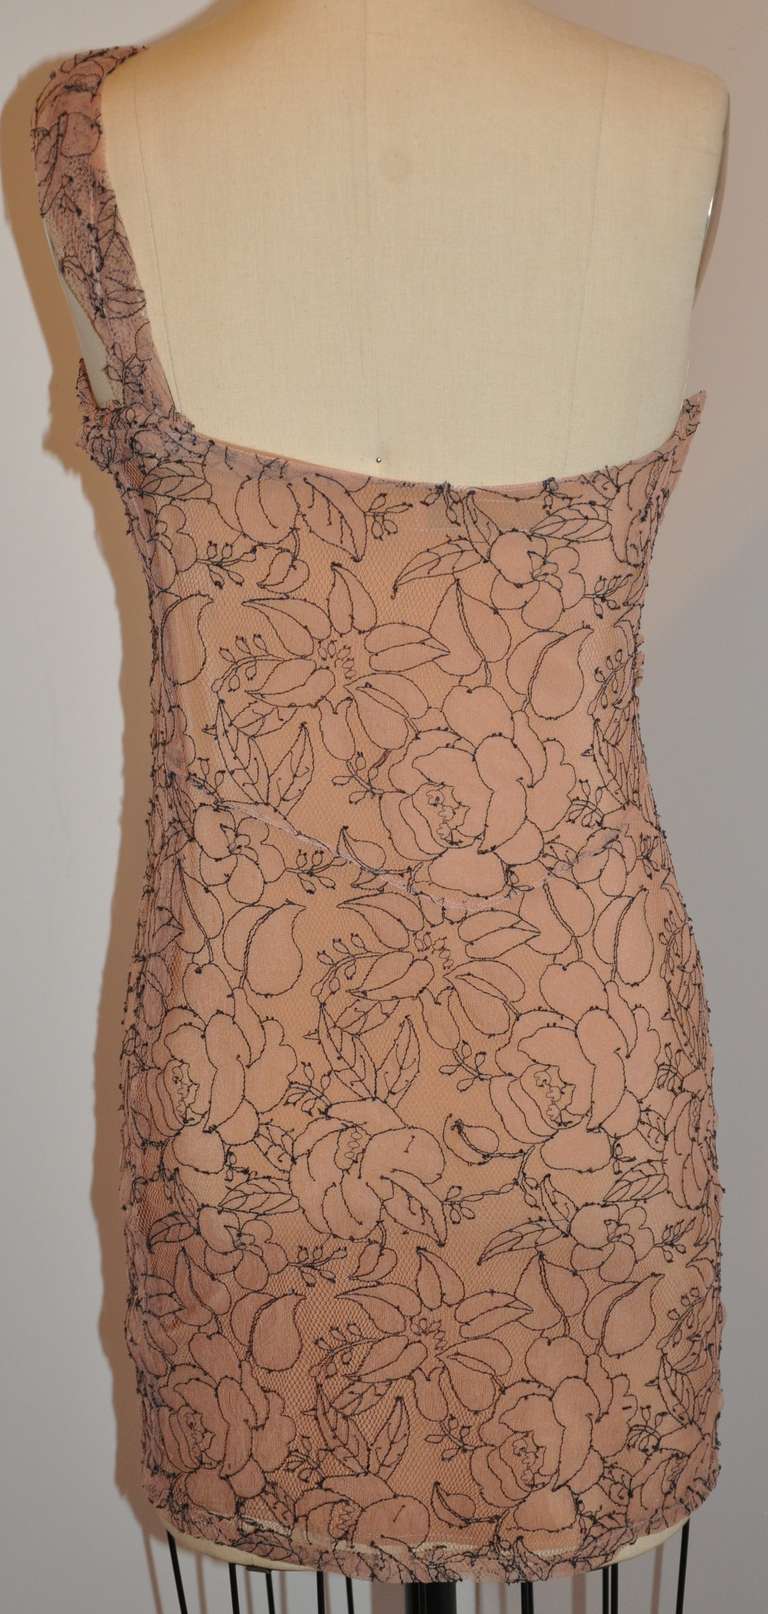 This wonderfully wicked, yet elegant Christian Dior cocktail dress from his 'Boutique' collection is fully lined with silk. There are 30 fabric-covered micro buttons covering the invisible zipper which measures 13